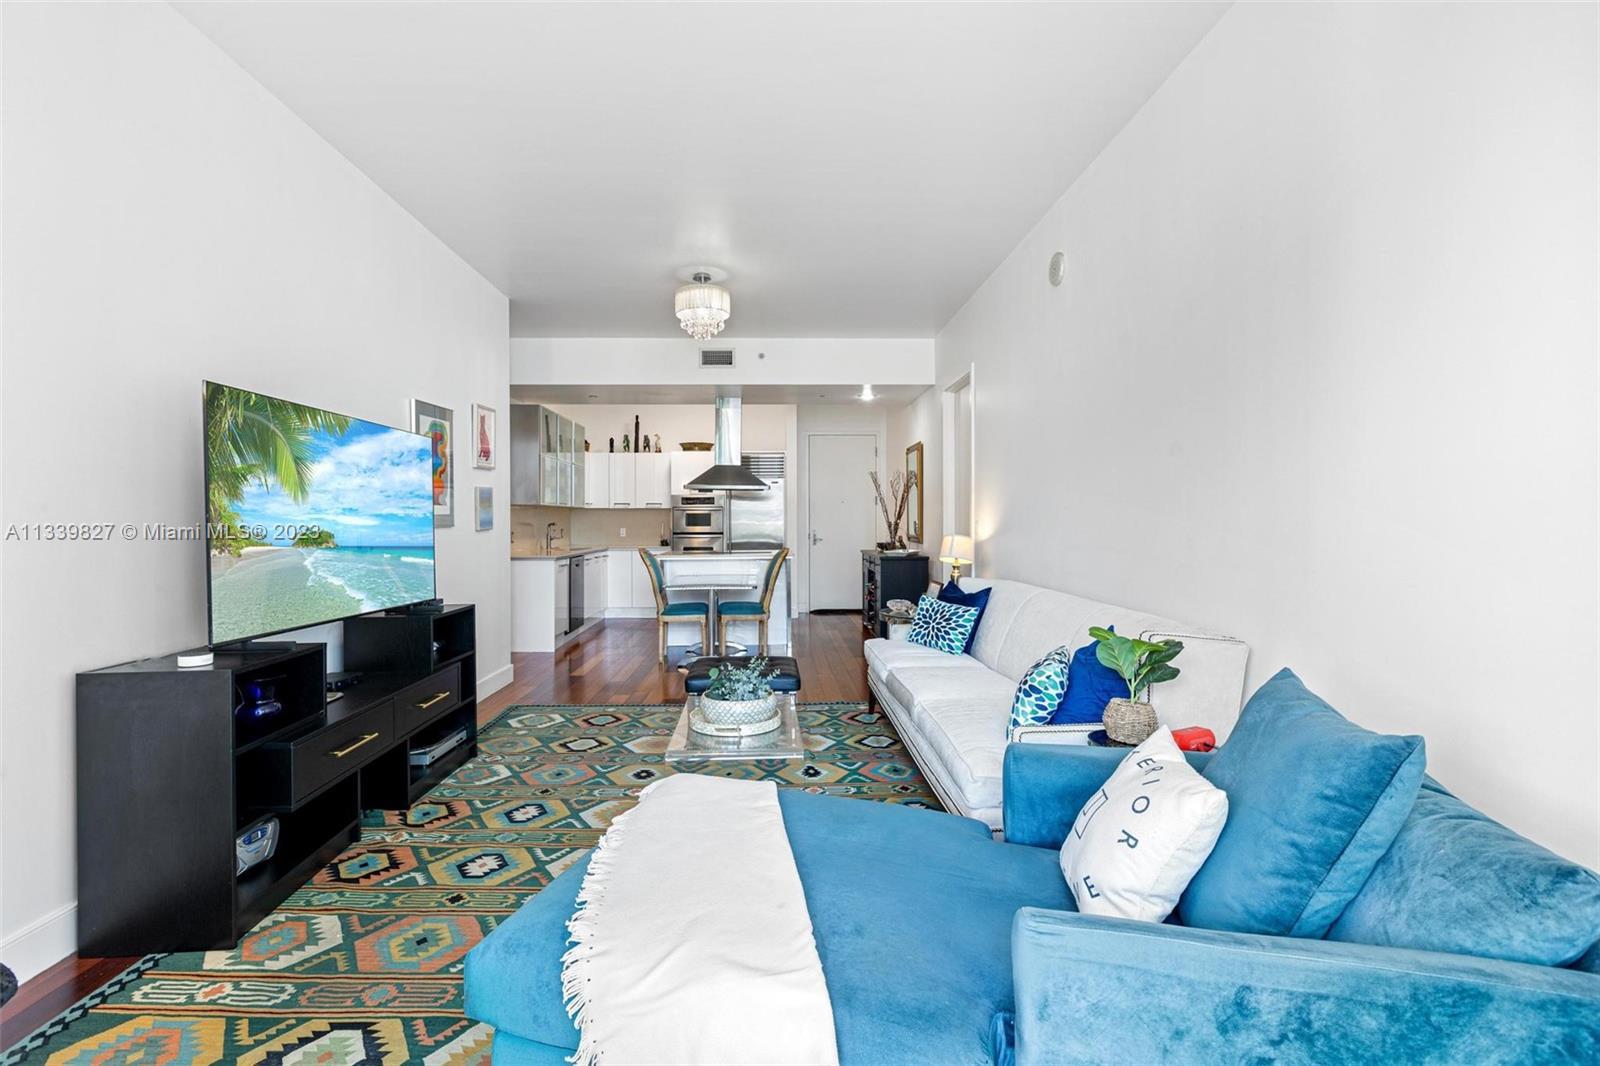 Welcome To Emerald At Brickell Where NY Meets Miami. Bright And Airy, This Spacious 2 BD 2.5 BA Feat